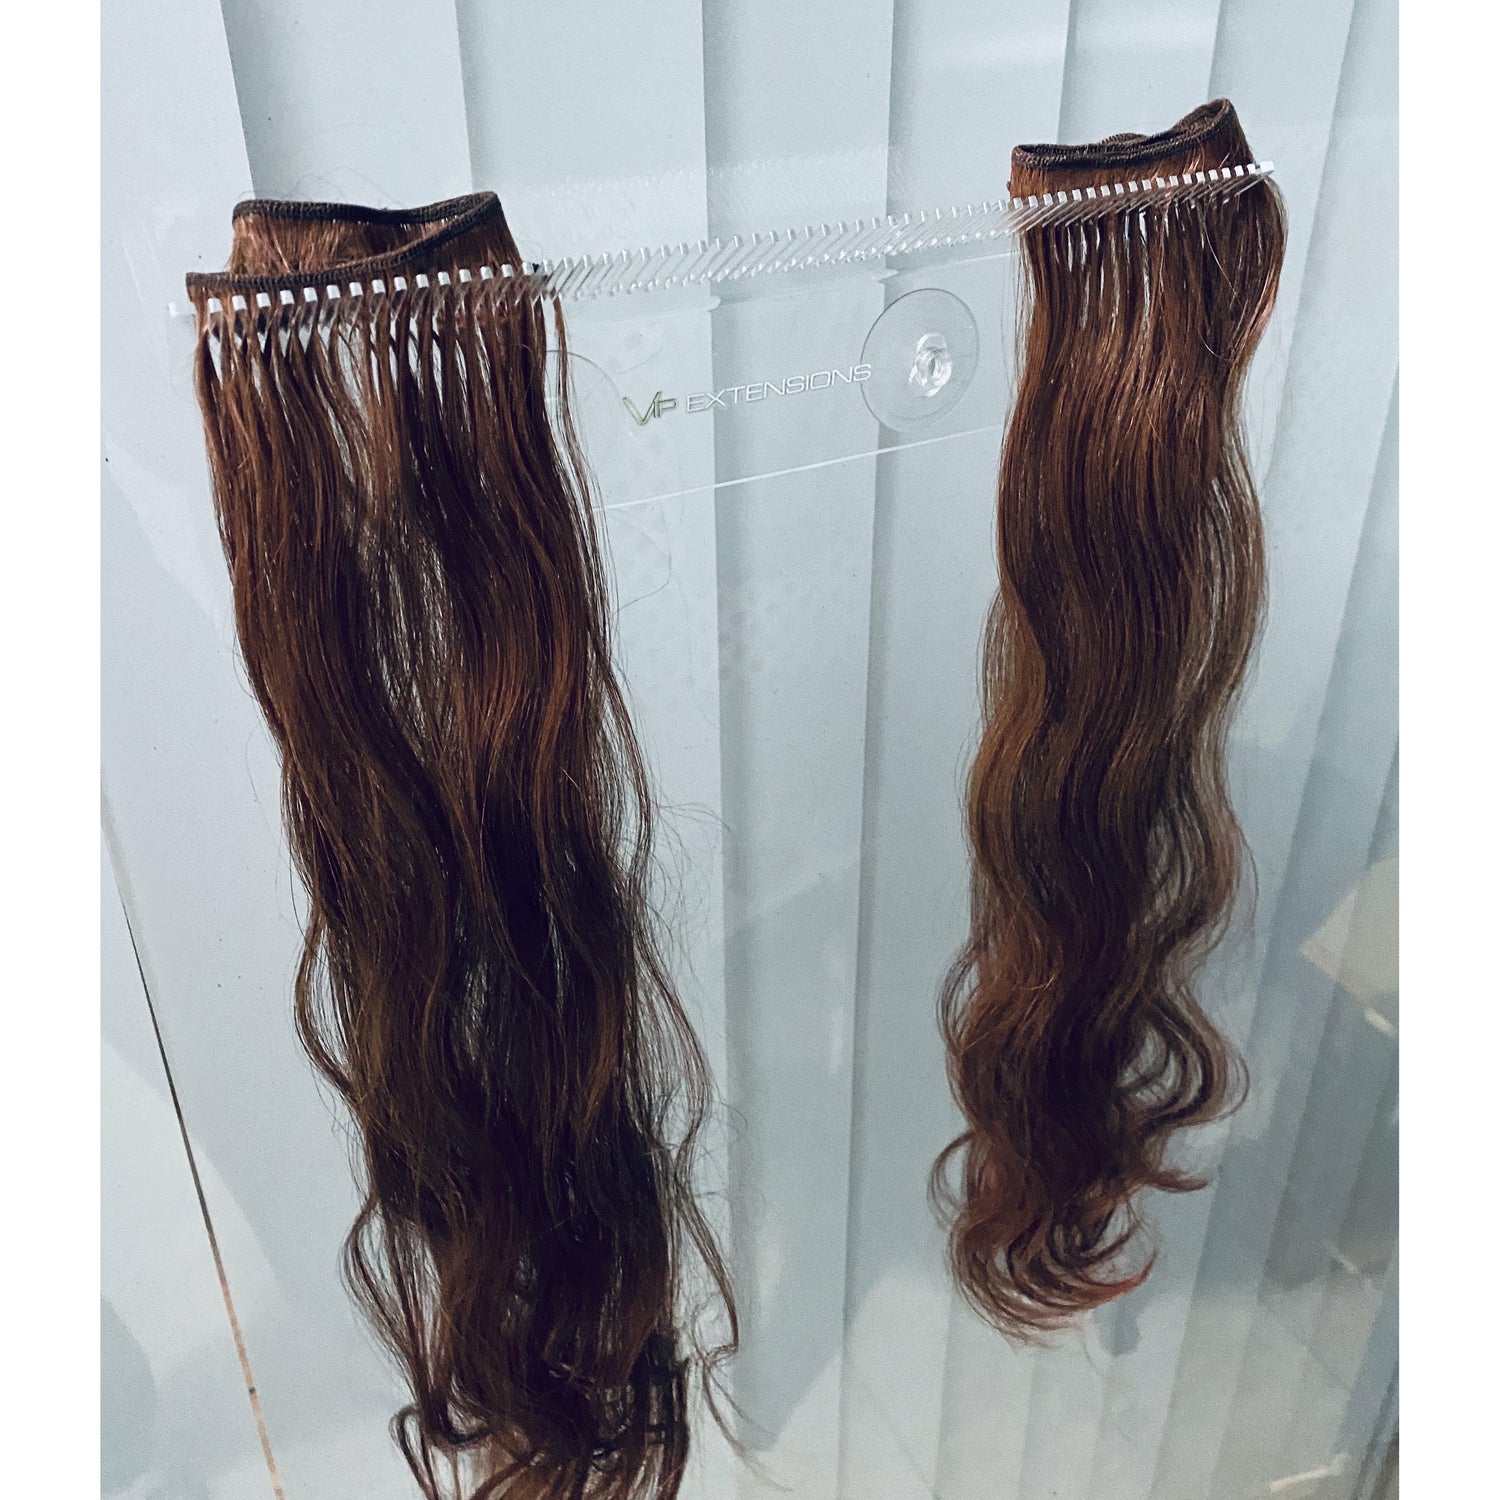 VIP Extensions Hair Extensions Acrylic Holder - VIP Extensions